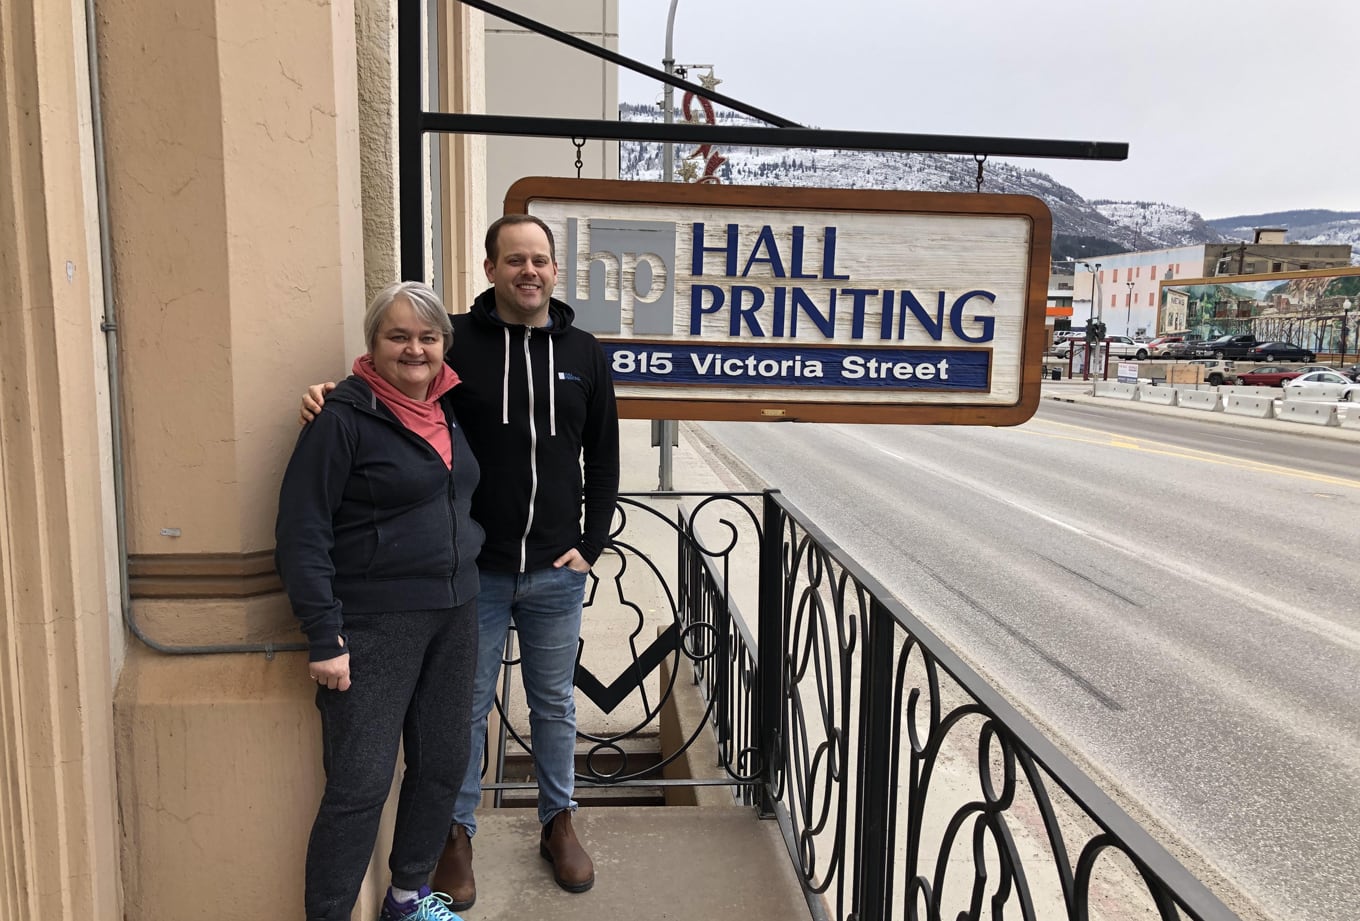 Exciting news for 100-year-old Hall Printing business